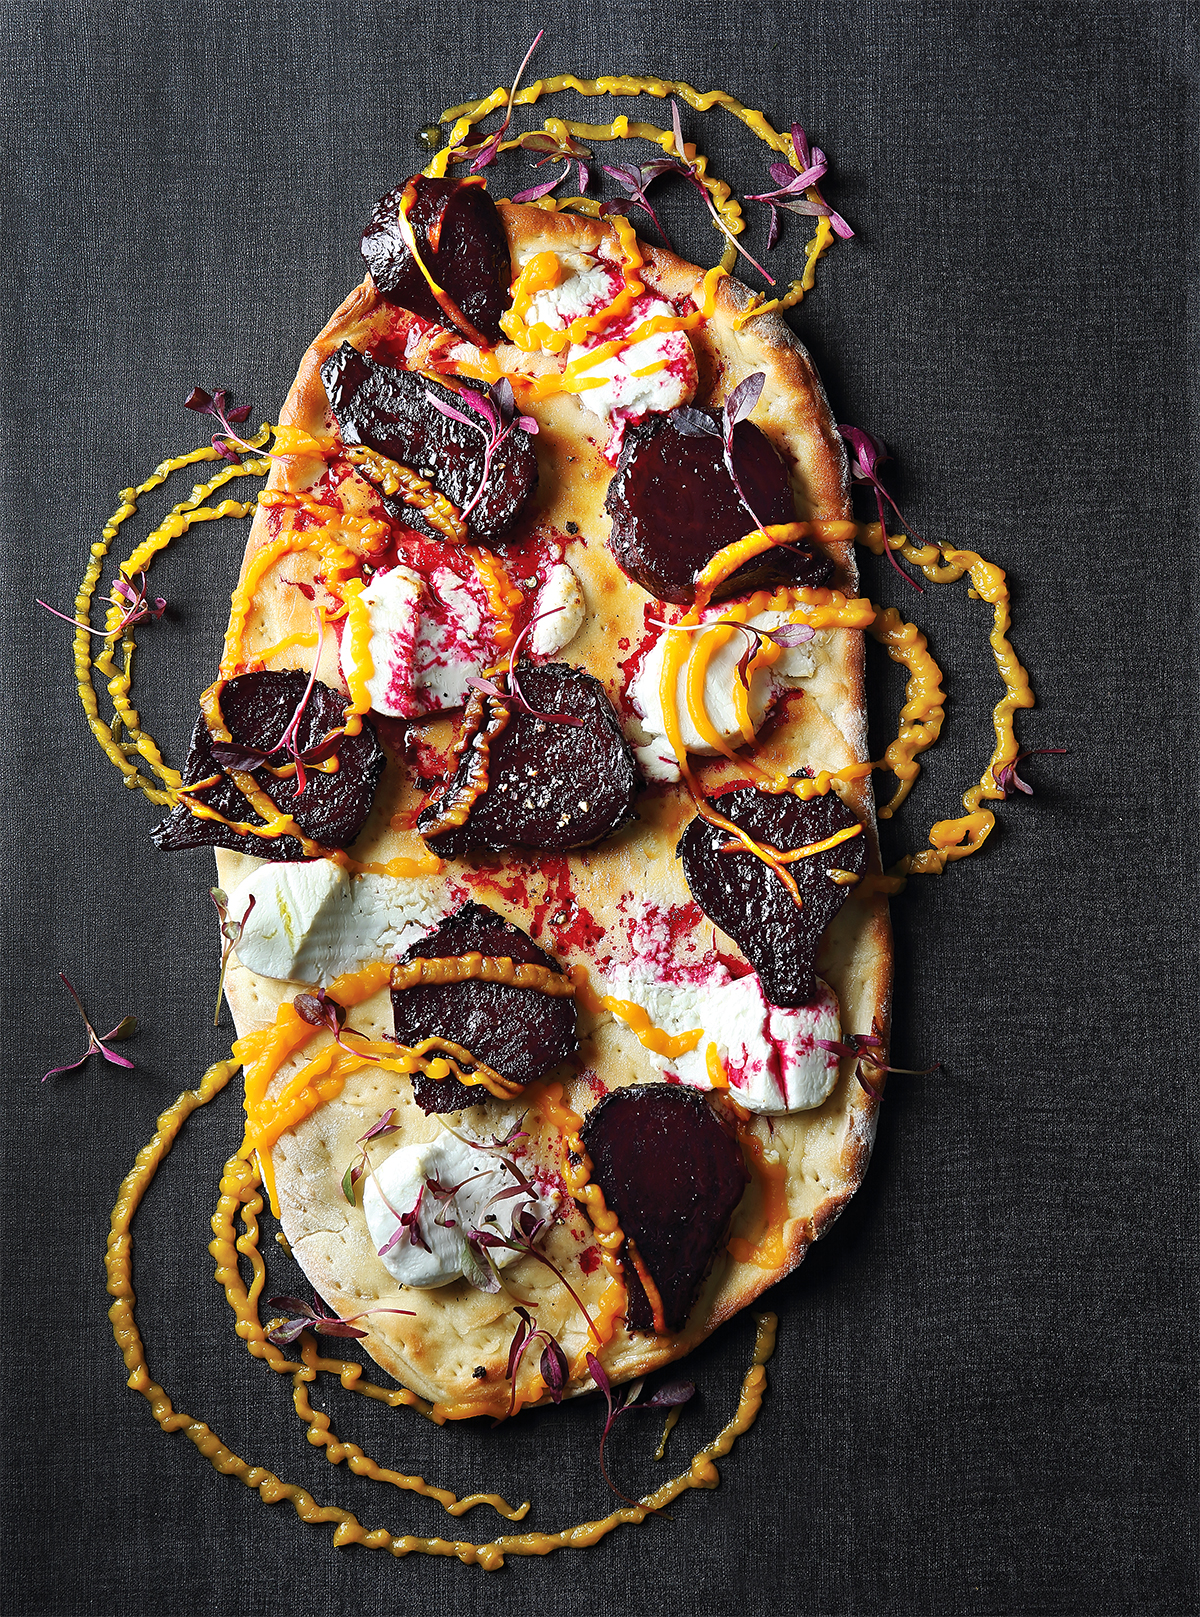 sweet-beetroot-pizza-with-butternut-puree-and-goats-cheesesweet-beetroot-pizza-with-butternut-puree-and-goats-cheese